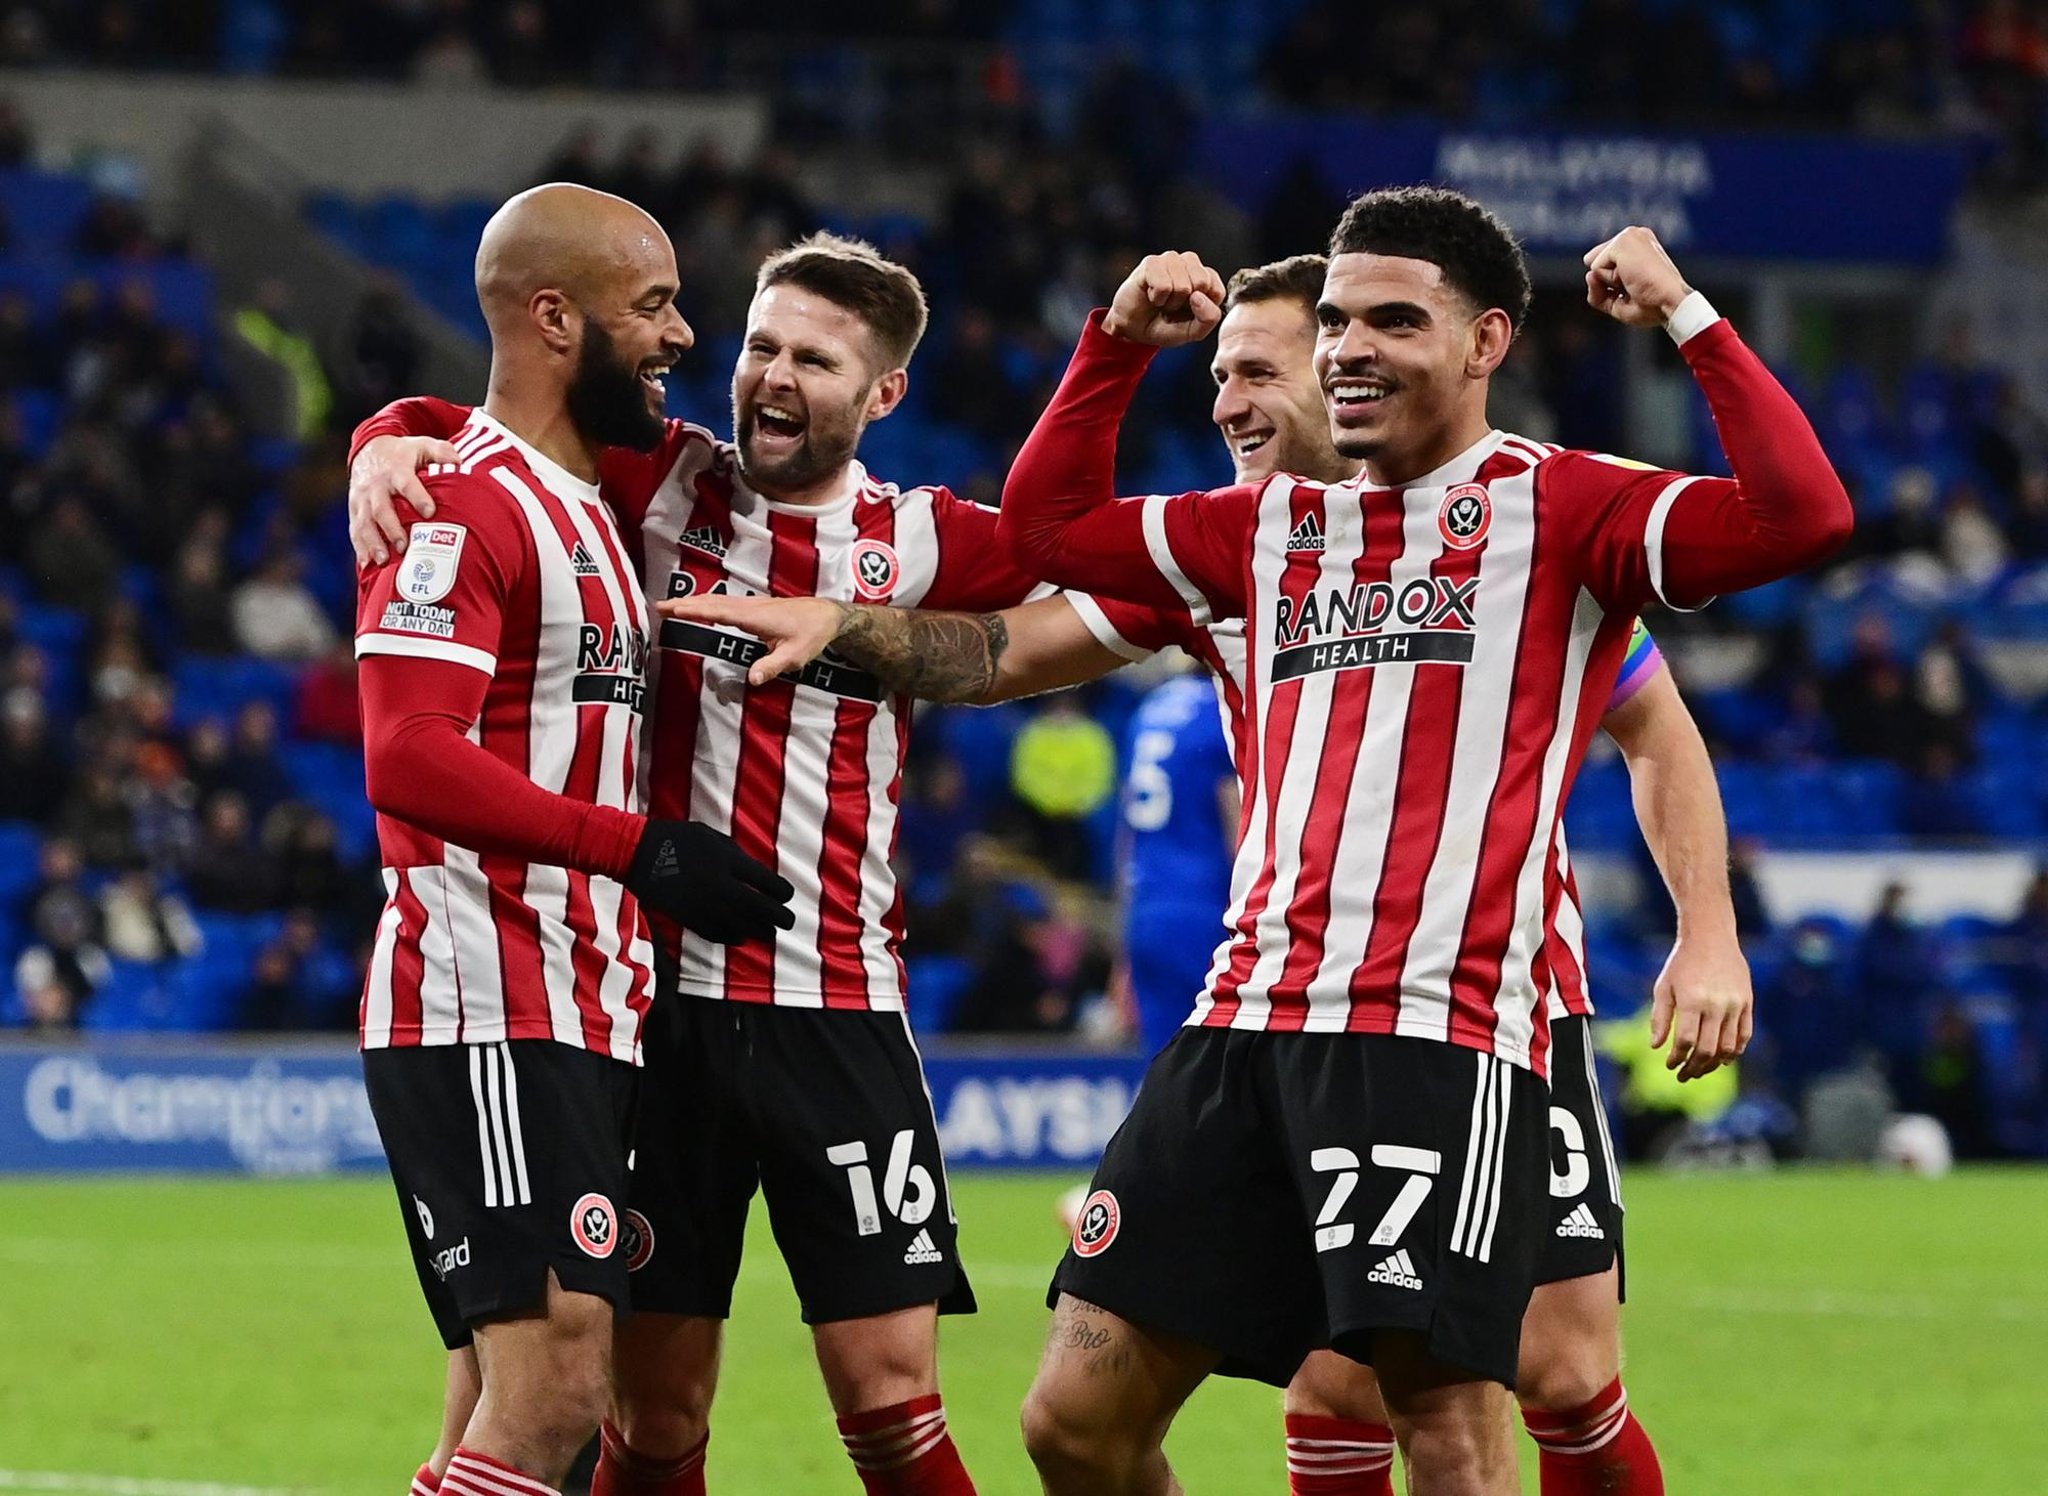 Sheffield United: David McGoldrick says what many Blades fans are thinking about Wolves loanee Morgan Gibbs-White | The Star